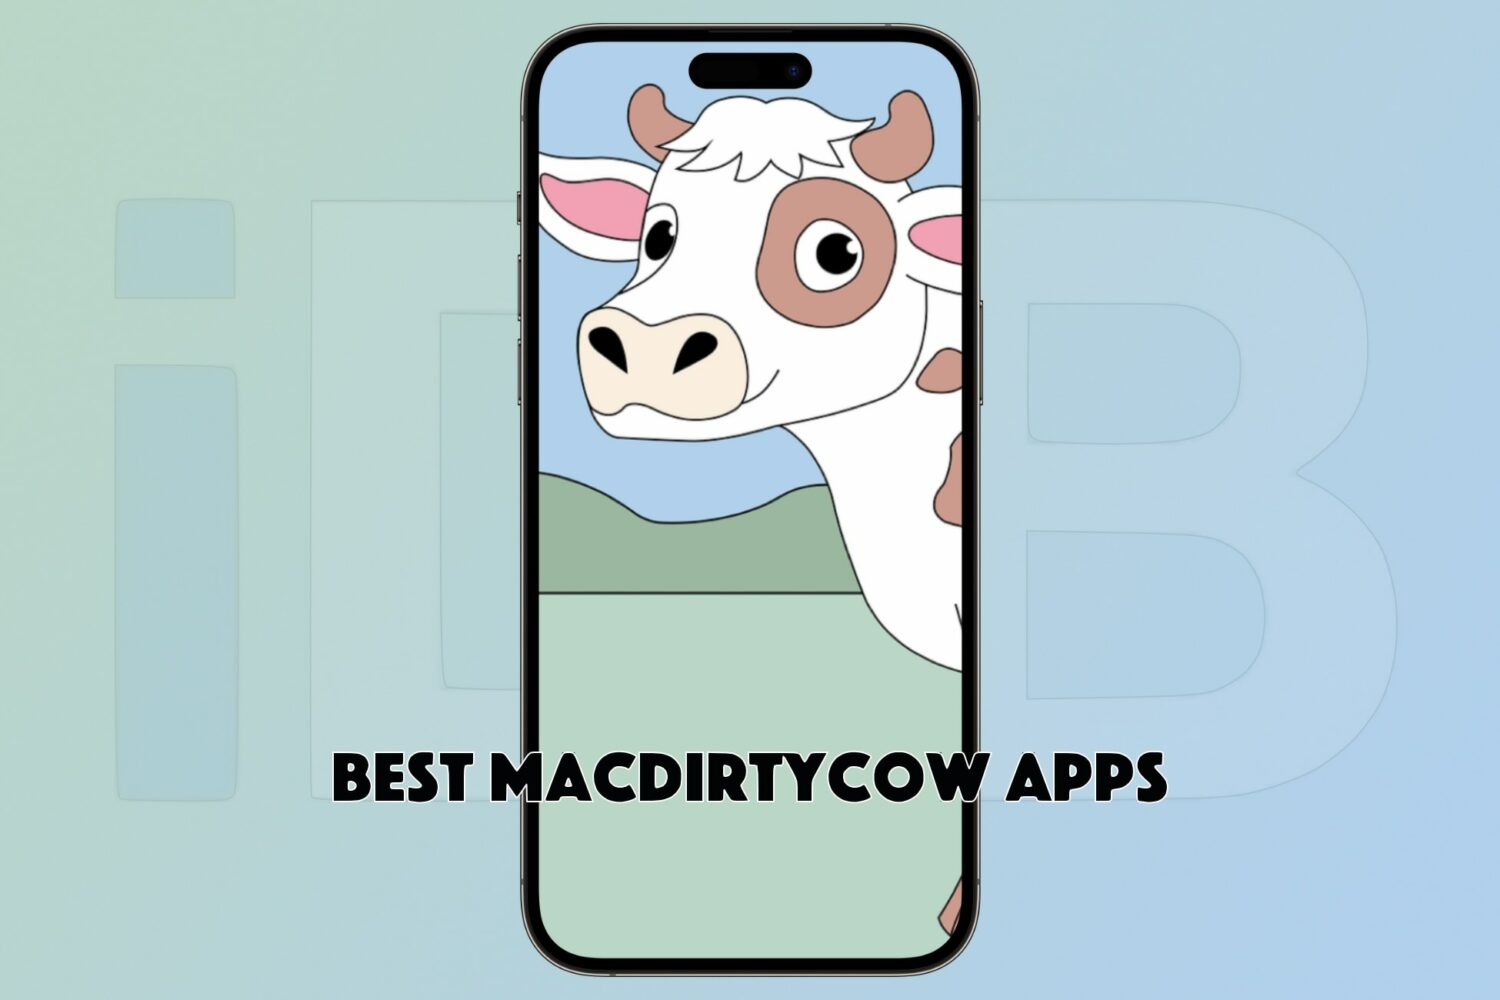 The best MacDirtyCow bug-compatible apps for iOS 15.0-16.1.2.